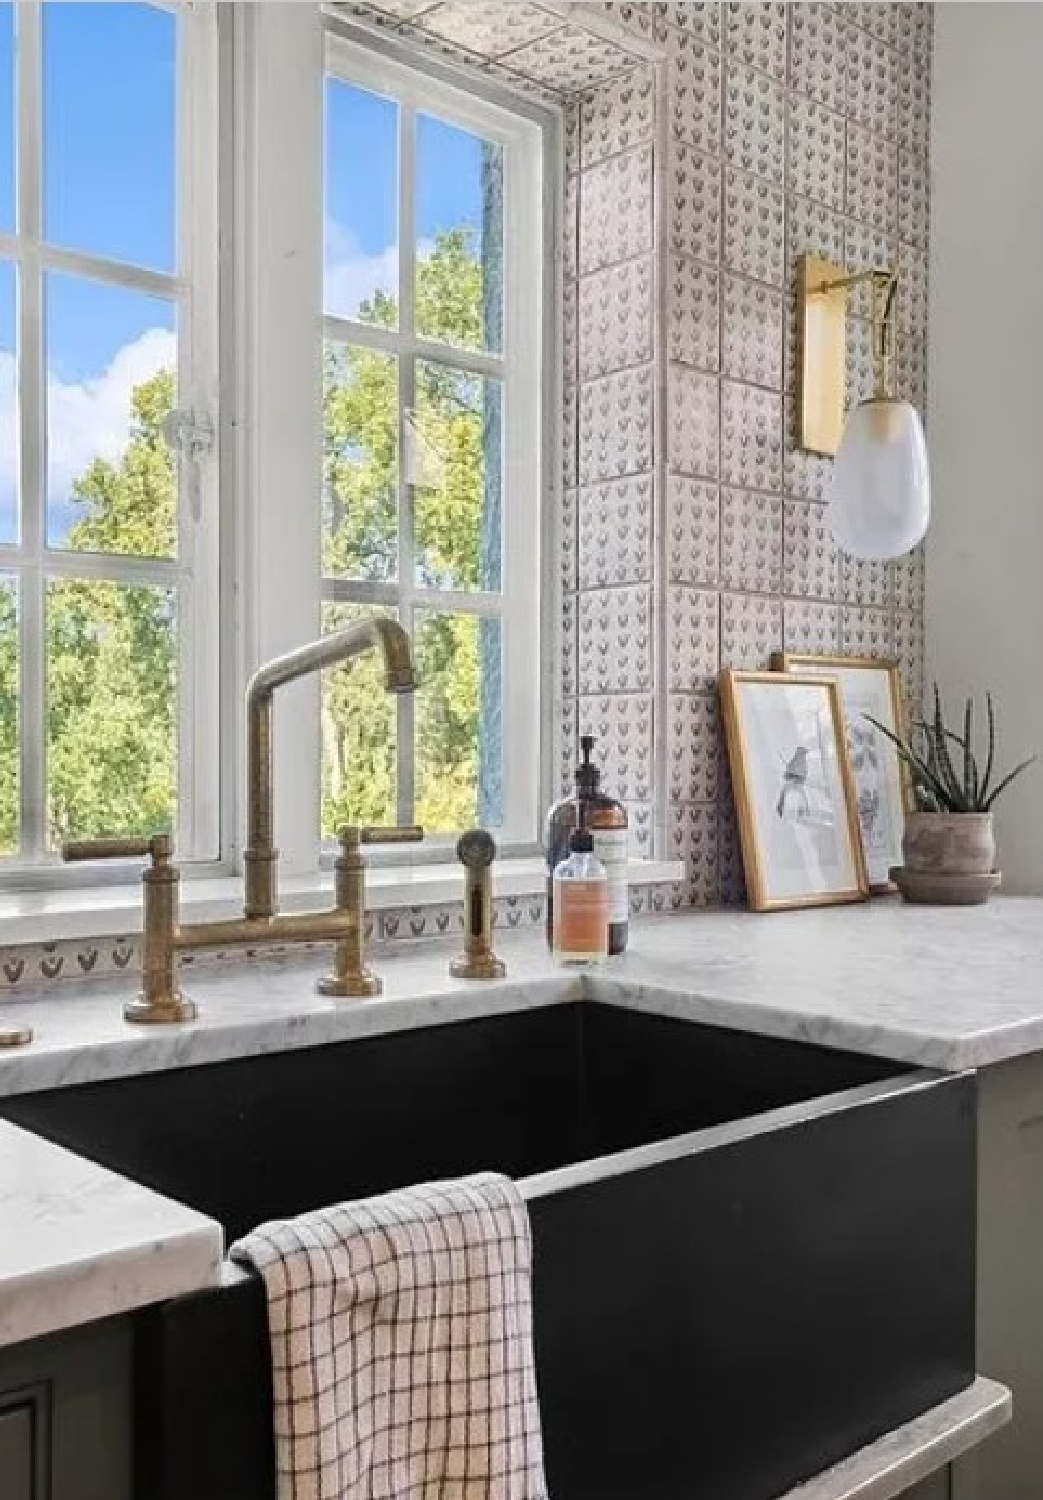 Tiled wall and farmhouse sink with Kallista faucet in Kate Marker's 1920 white stucco Barrington Hills, IL Home (160 N. Buckley Rd) with modern, serene, unfussy, timeless interiors. #katemarkerinteriors @thedawnmckennagroup #katemarkerhome